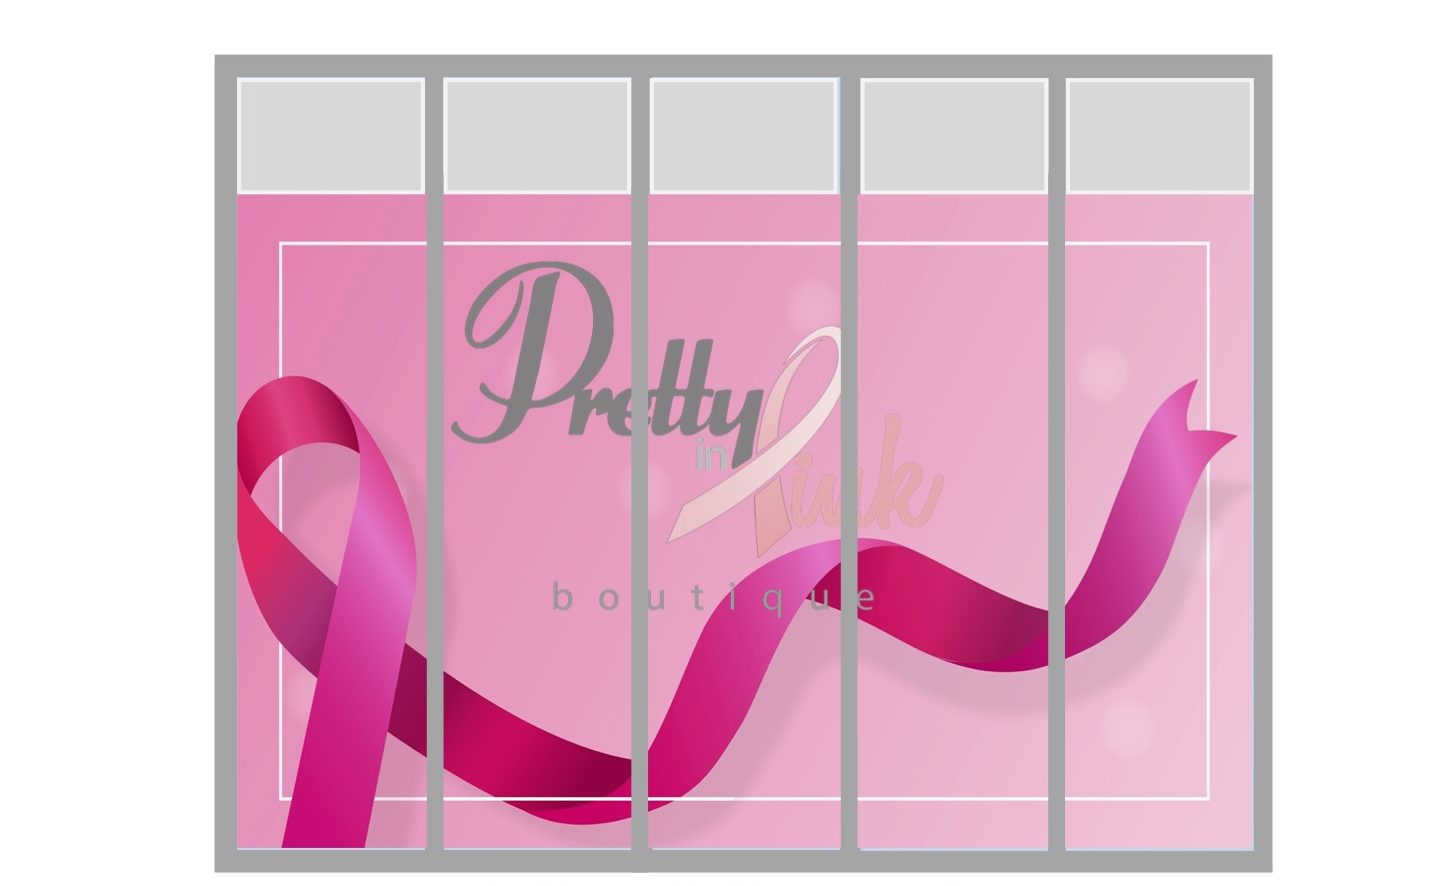 Approved Concept of the Wall Graphic Used to Enhance the Pretty in Pink Boutique Brand